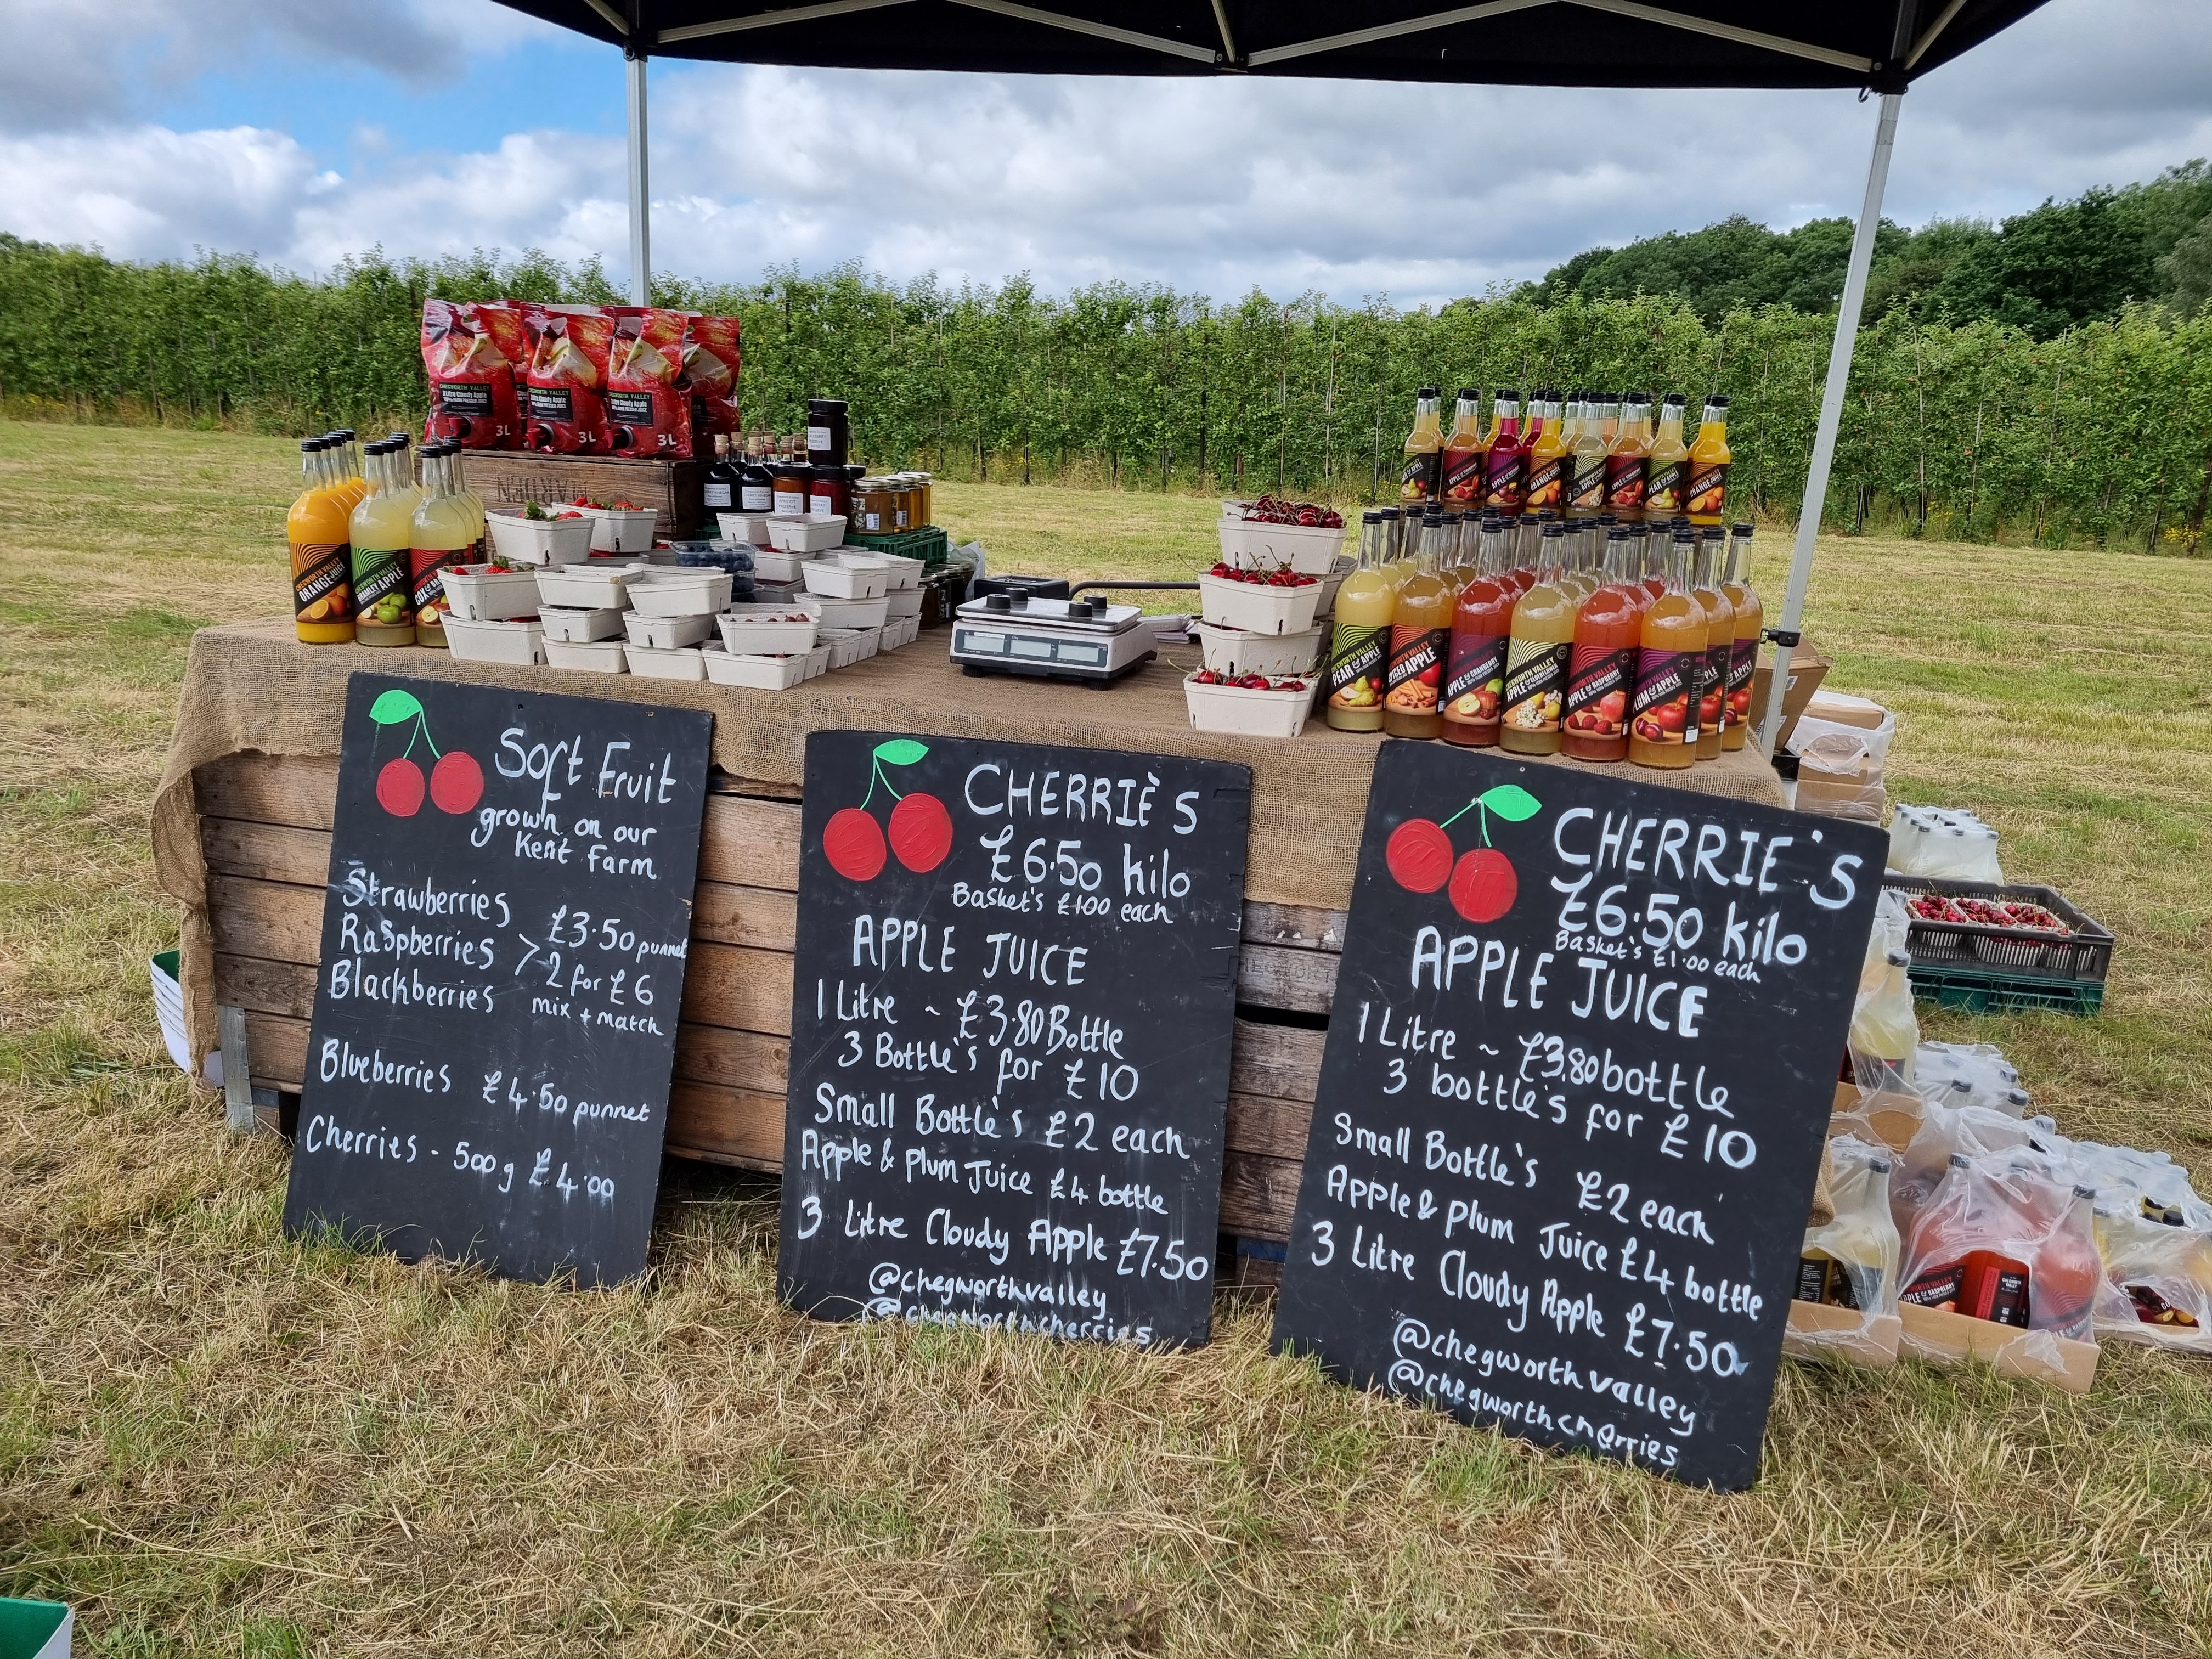 Kentish fruits and juices for sale